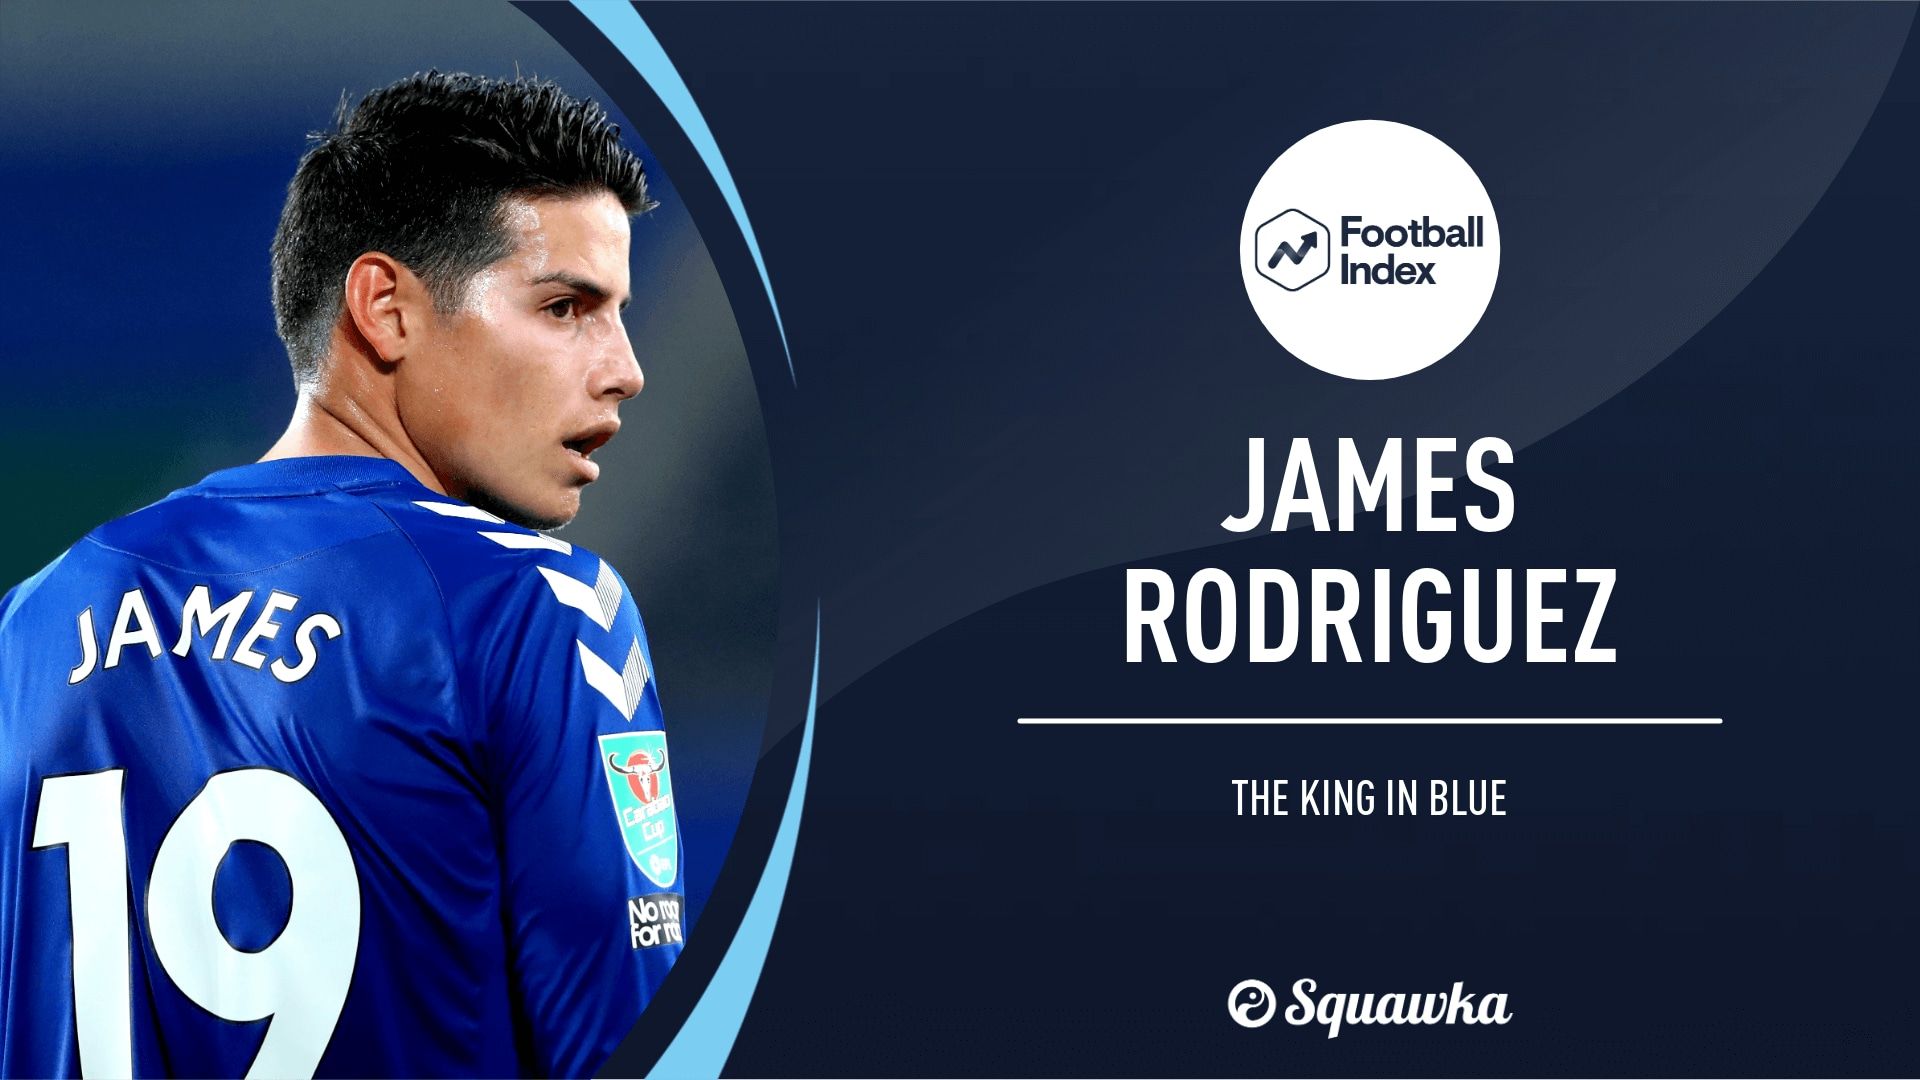 James Rodriguez: The King in Blue is showing Everton are serious